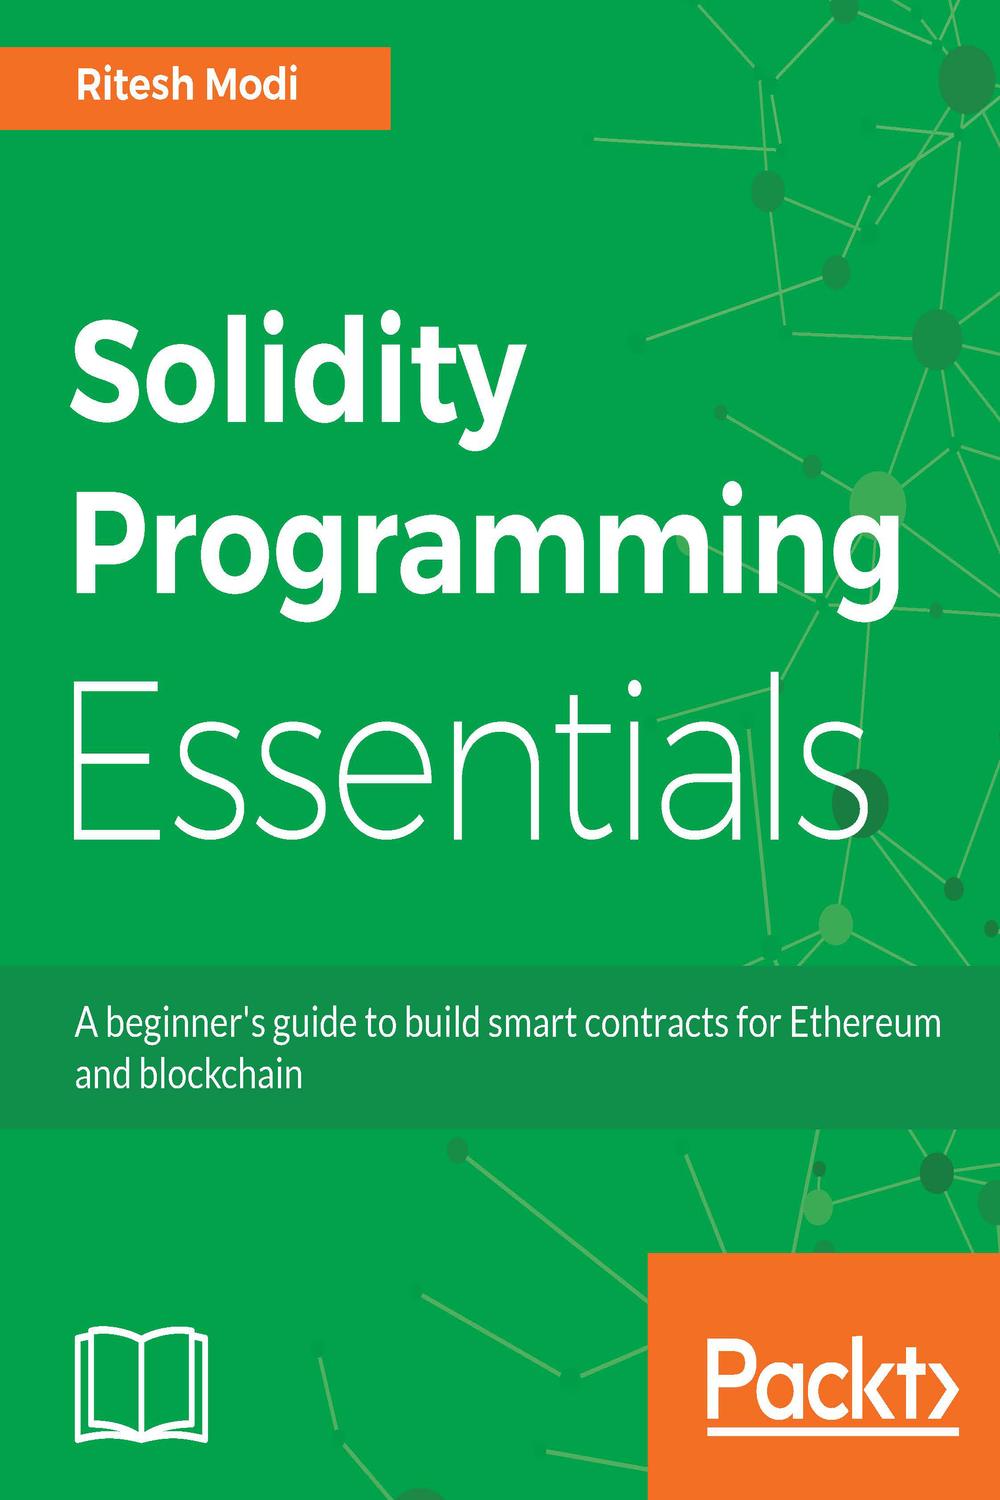 Solidity ethereum pdf most bitcoin